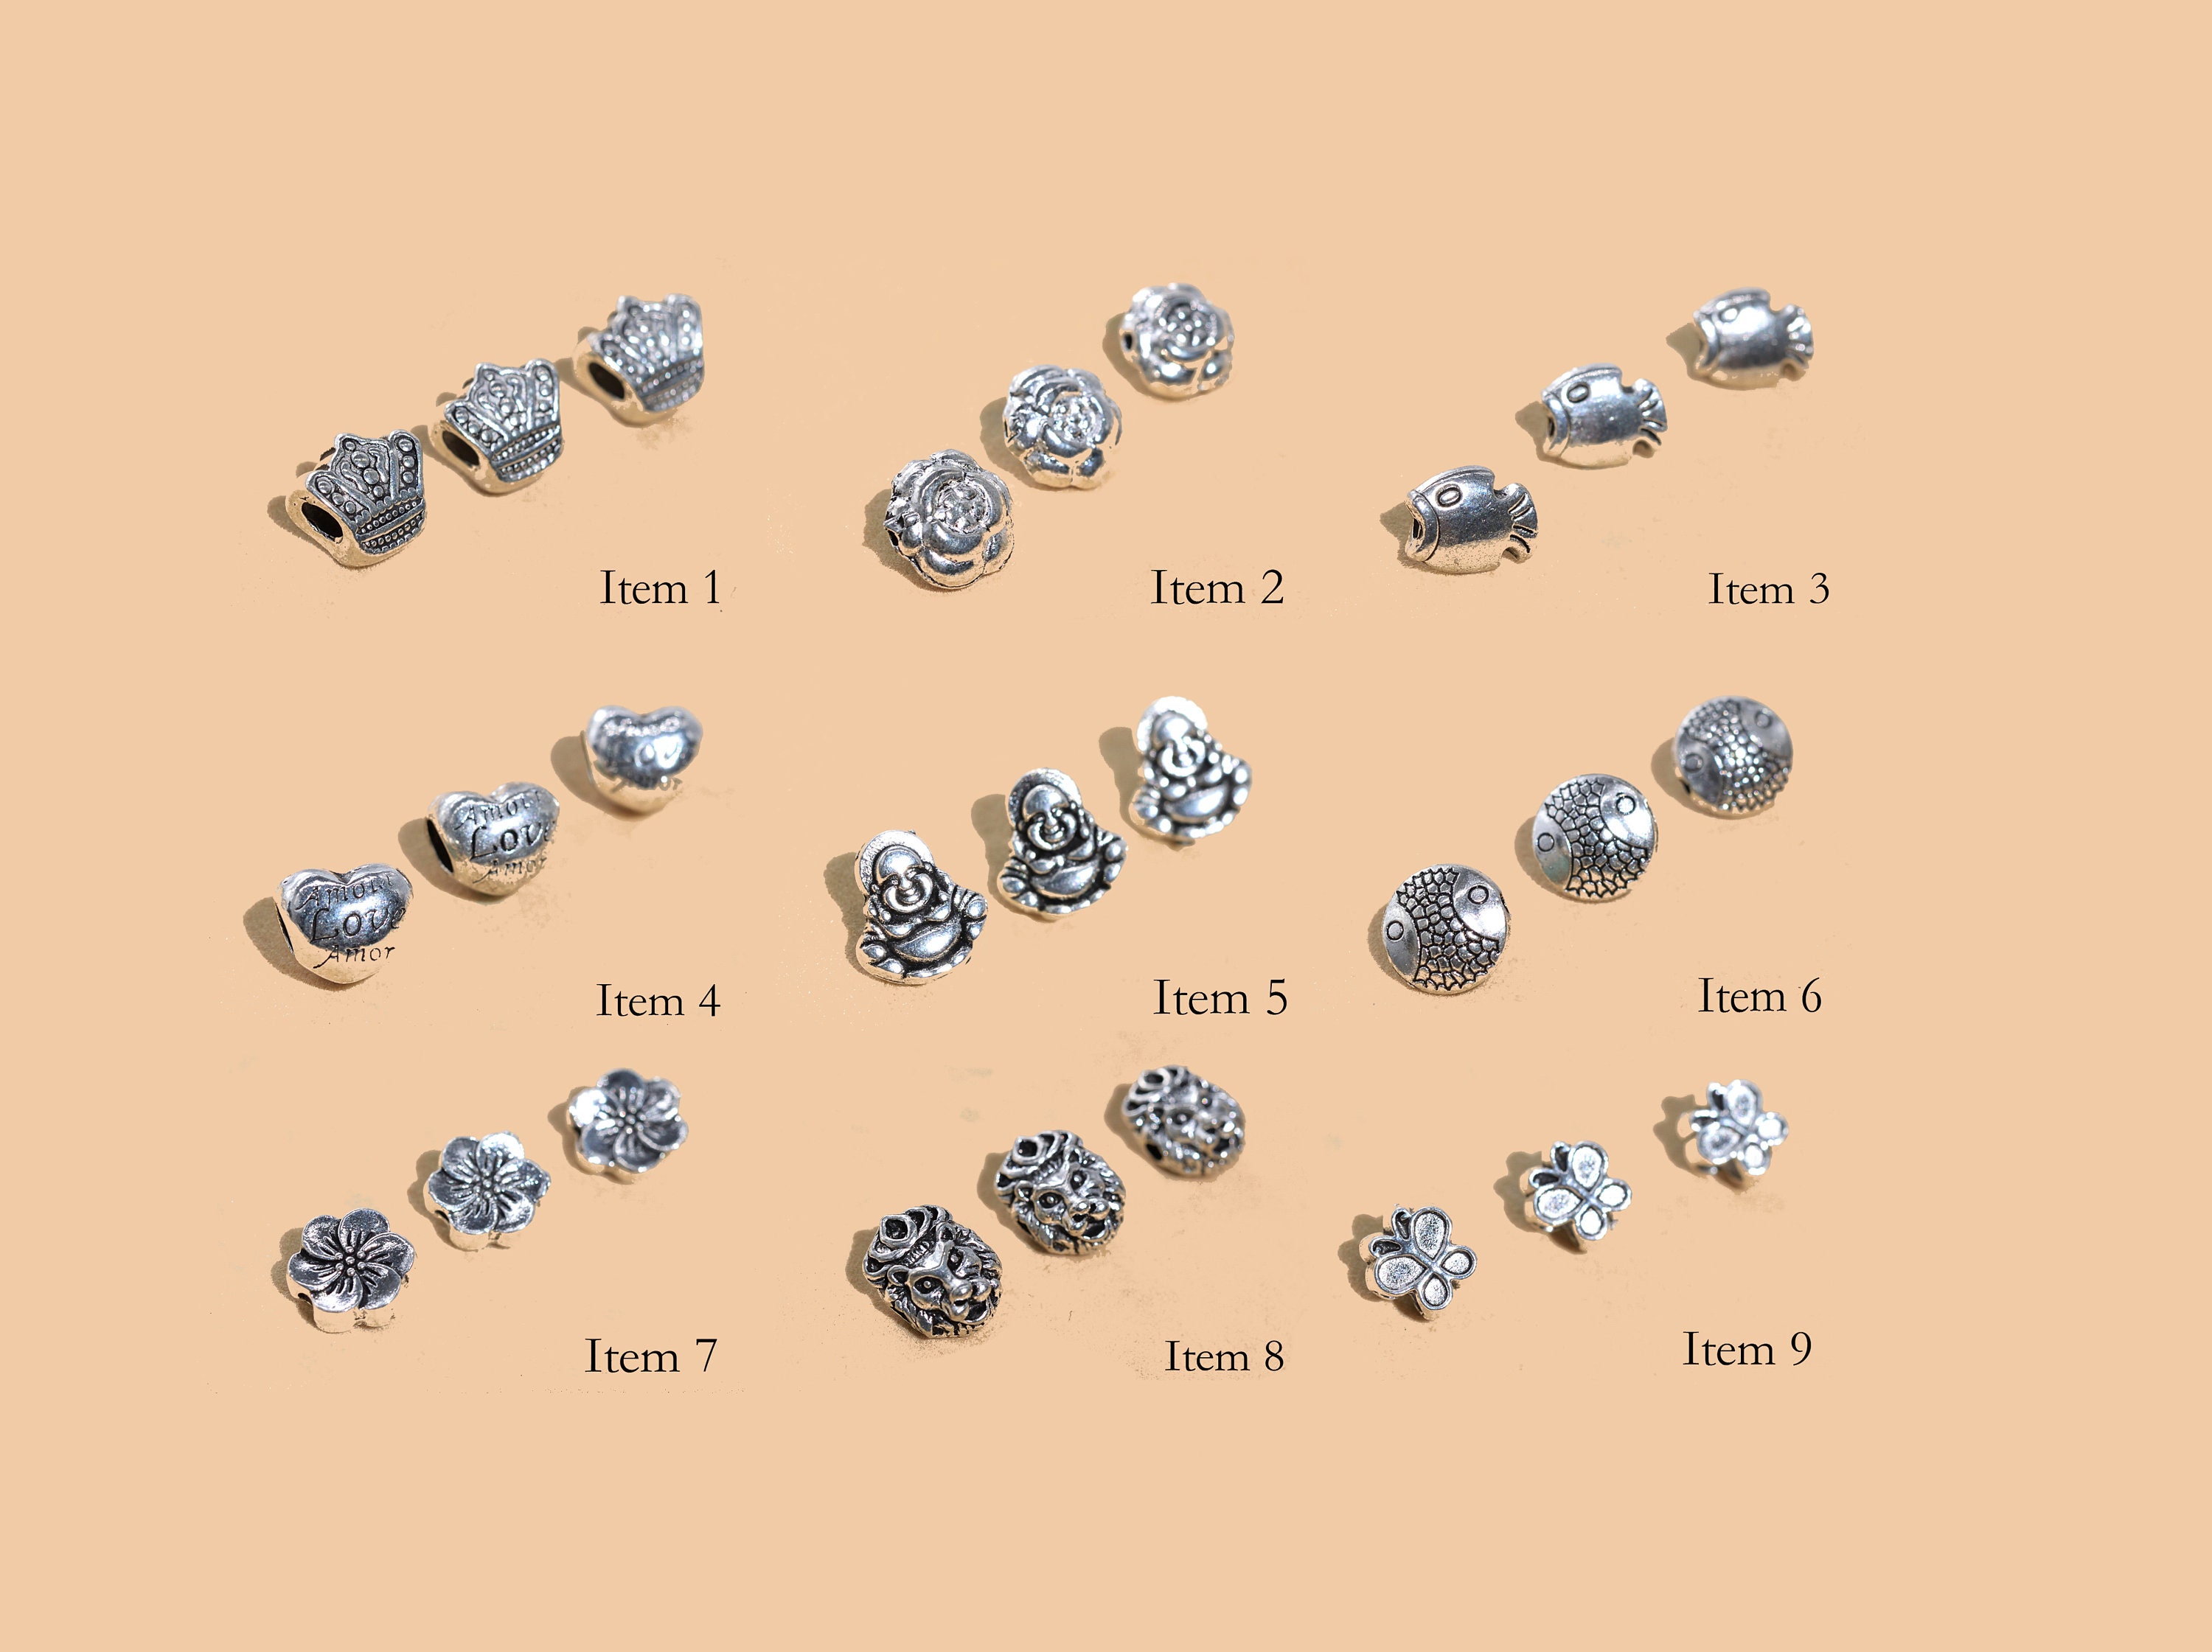 93 10 pcs Antique Silver Flower Spacer Beads 15 mm